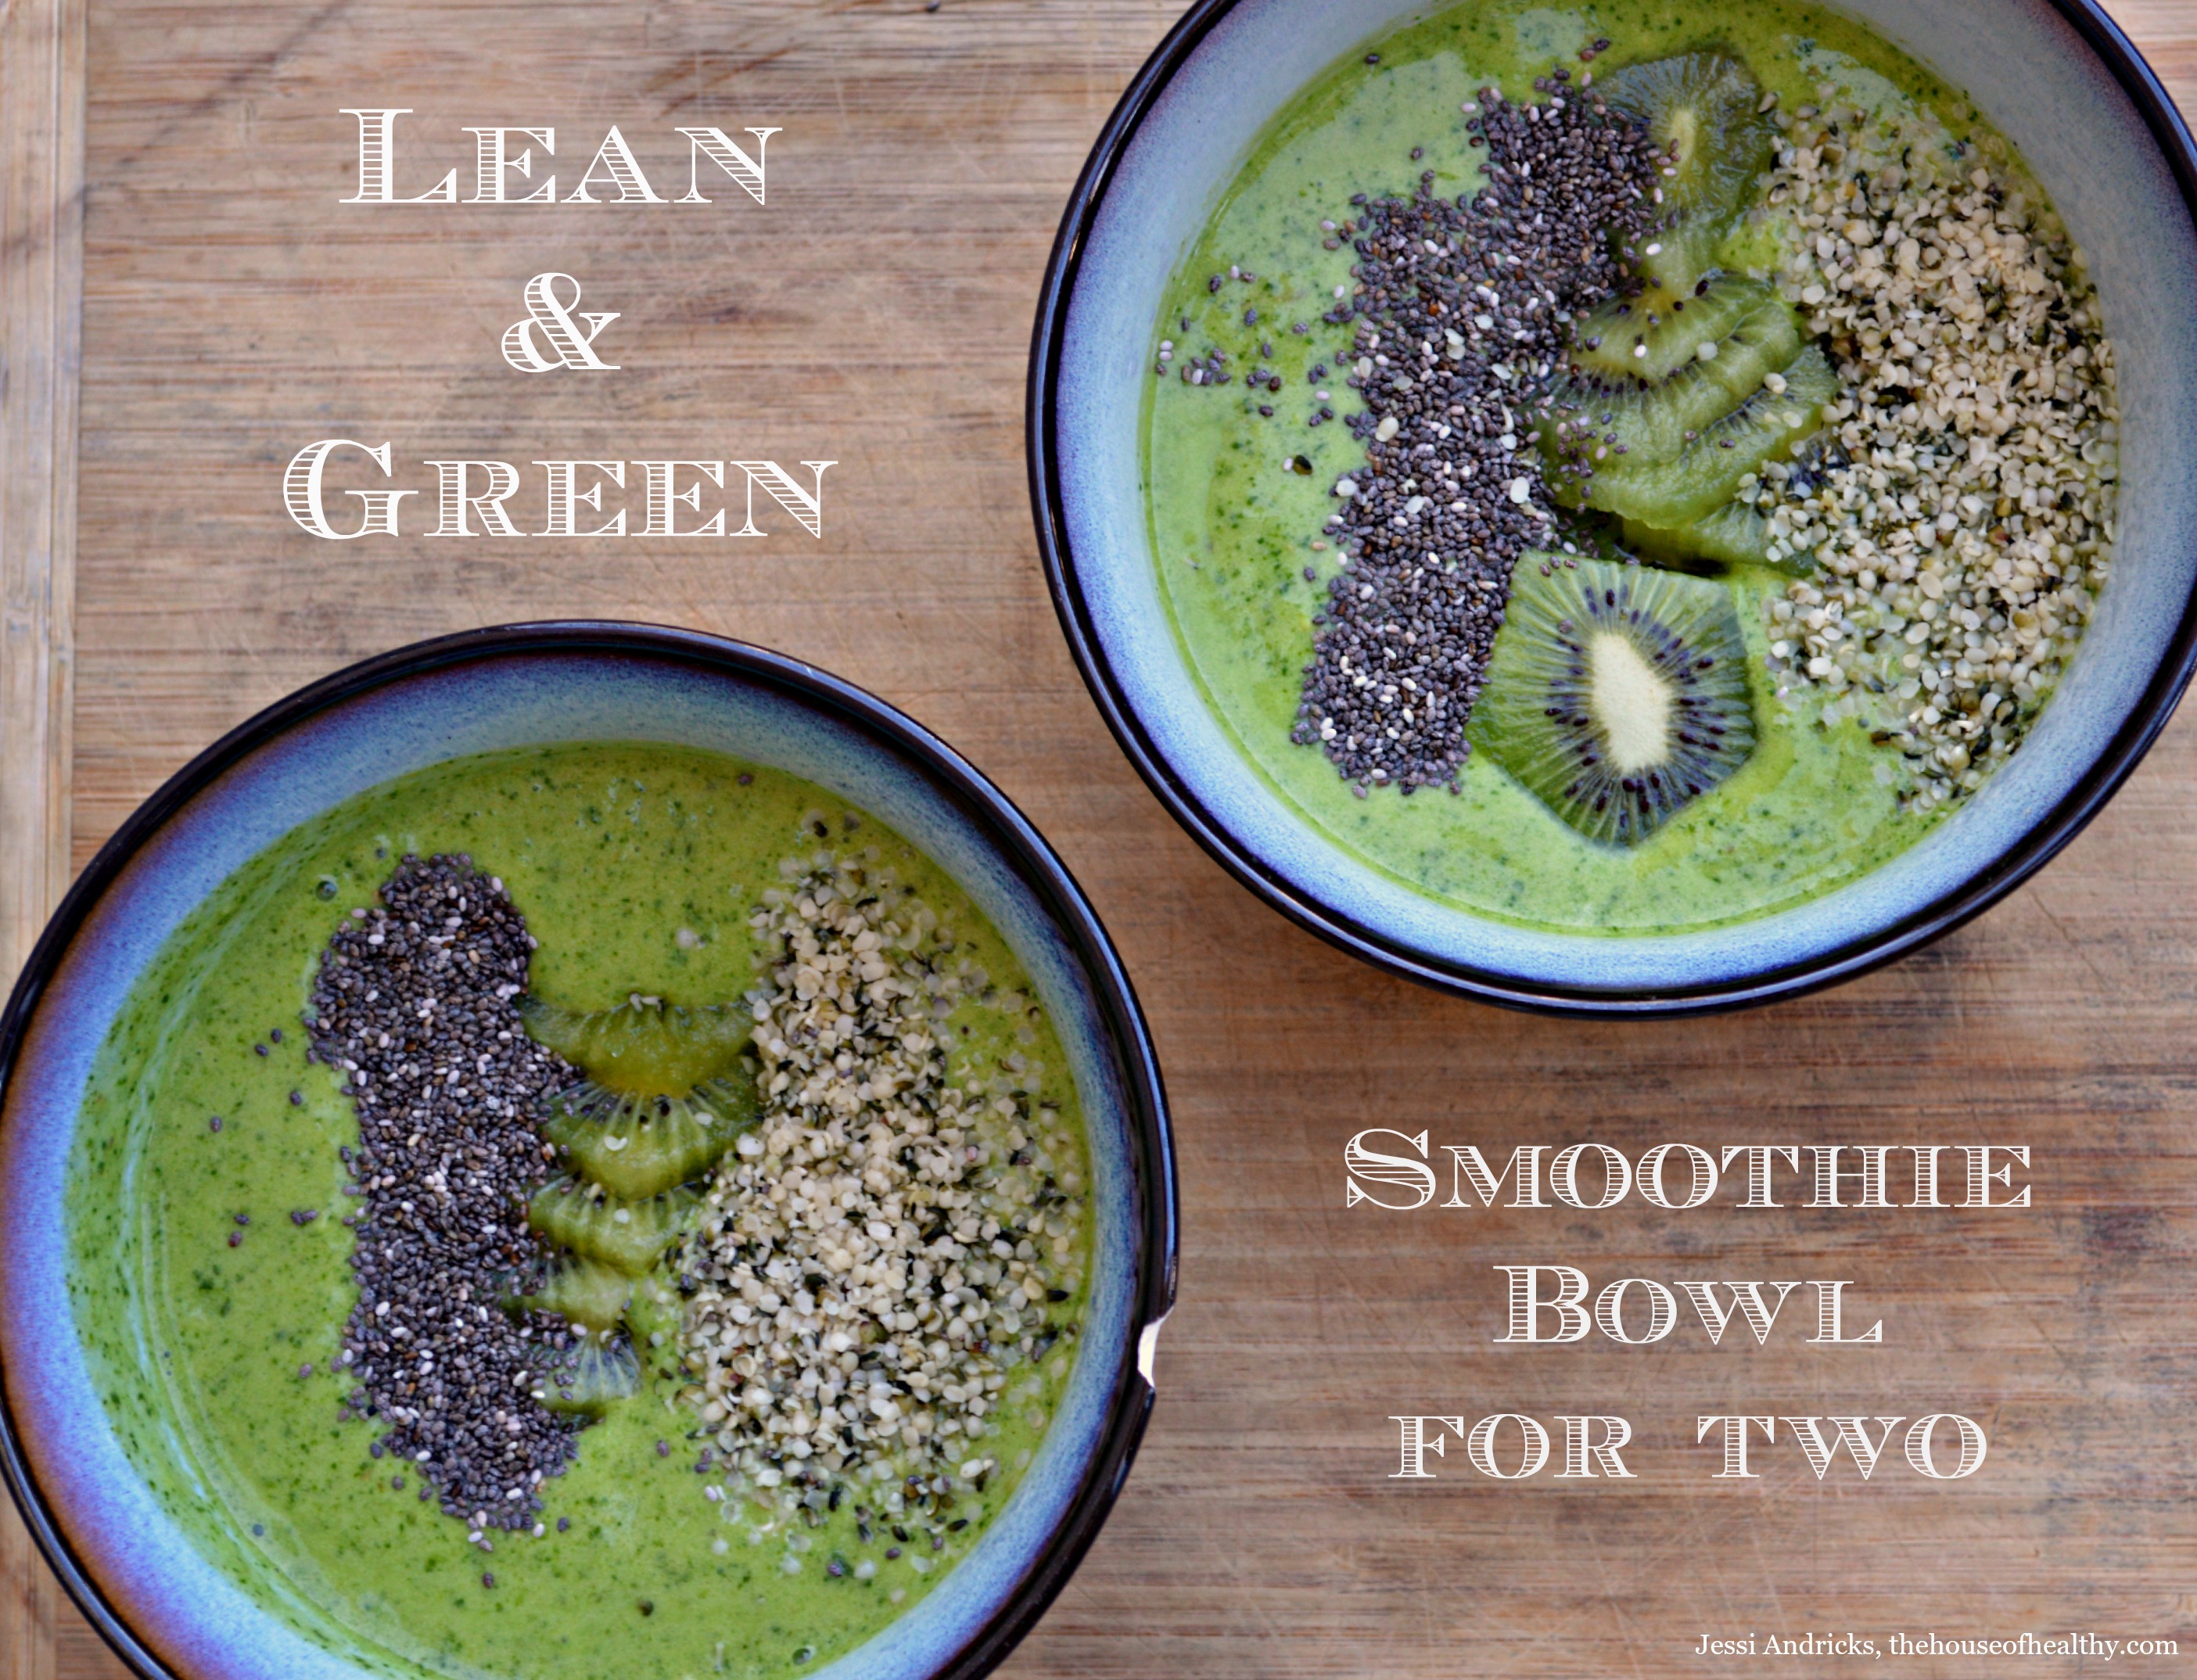 http://thehouseofhealthy.com/wp-content/uploads/2015/03/smoothie-bowl.jpg